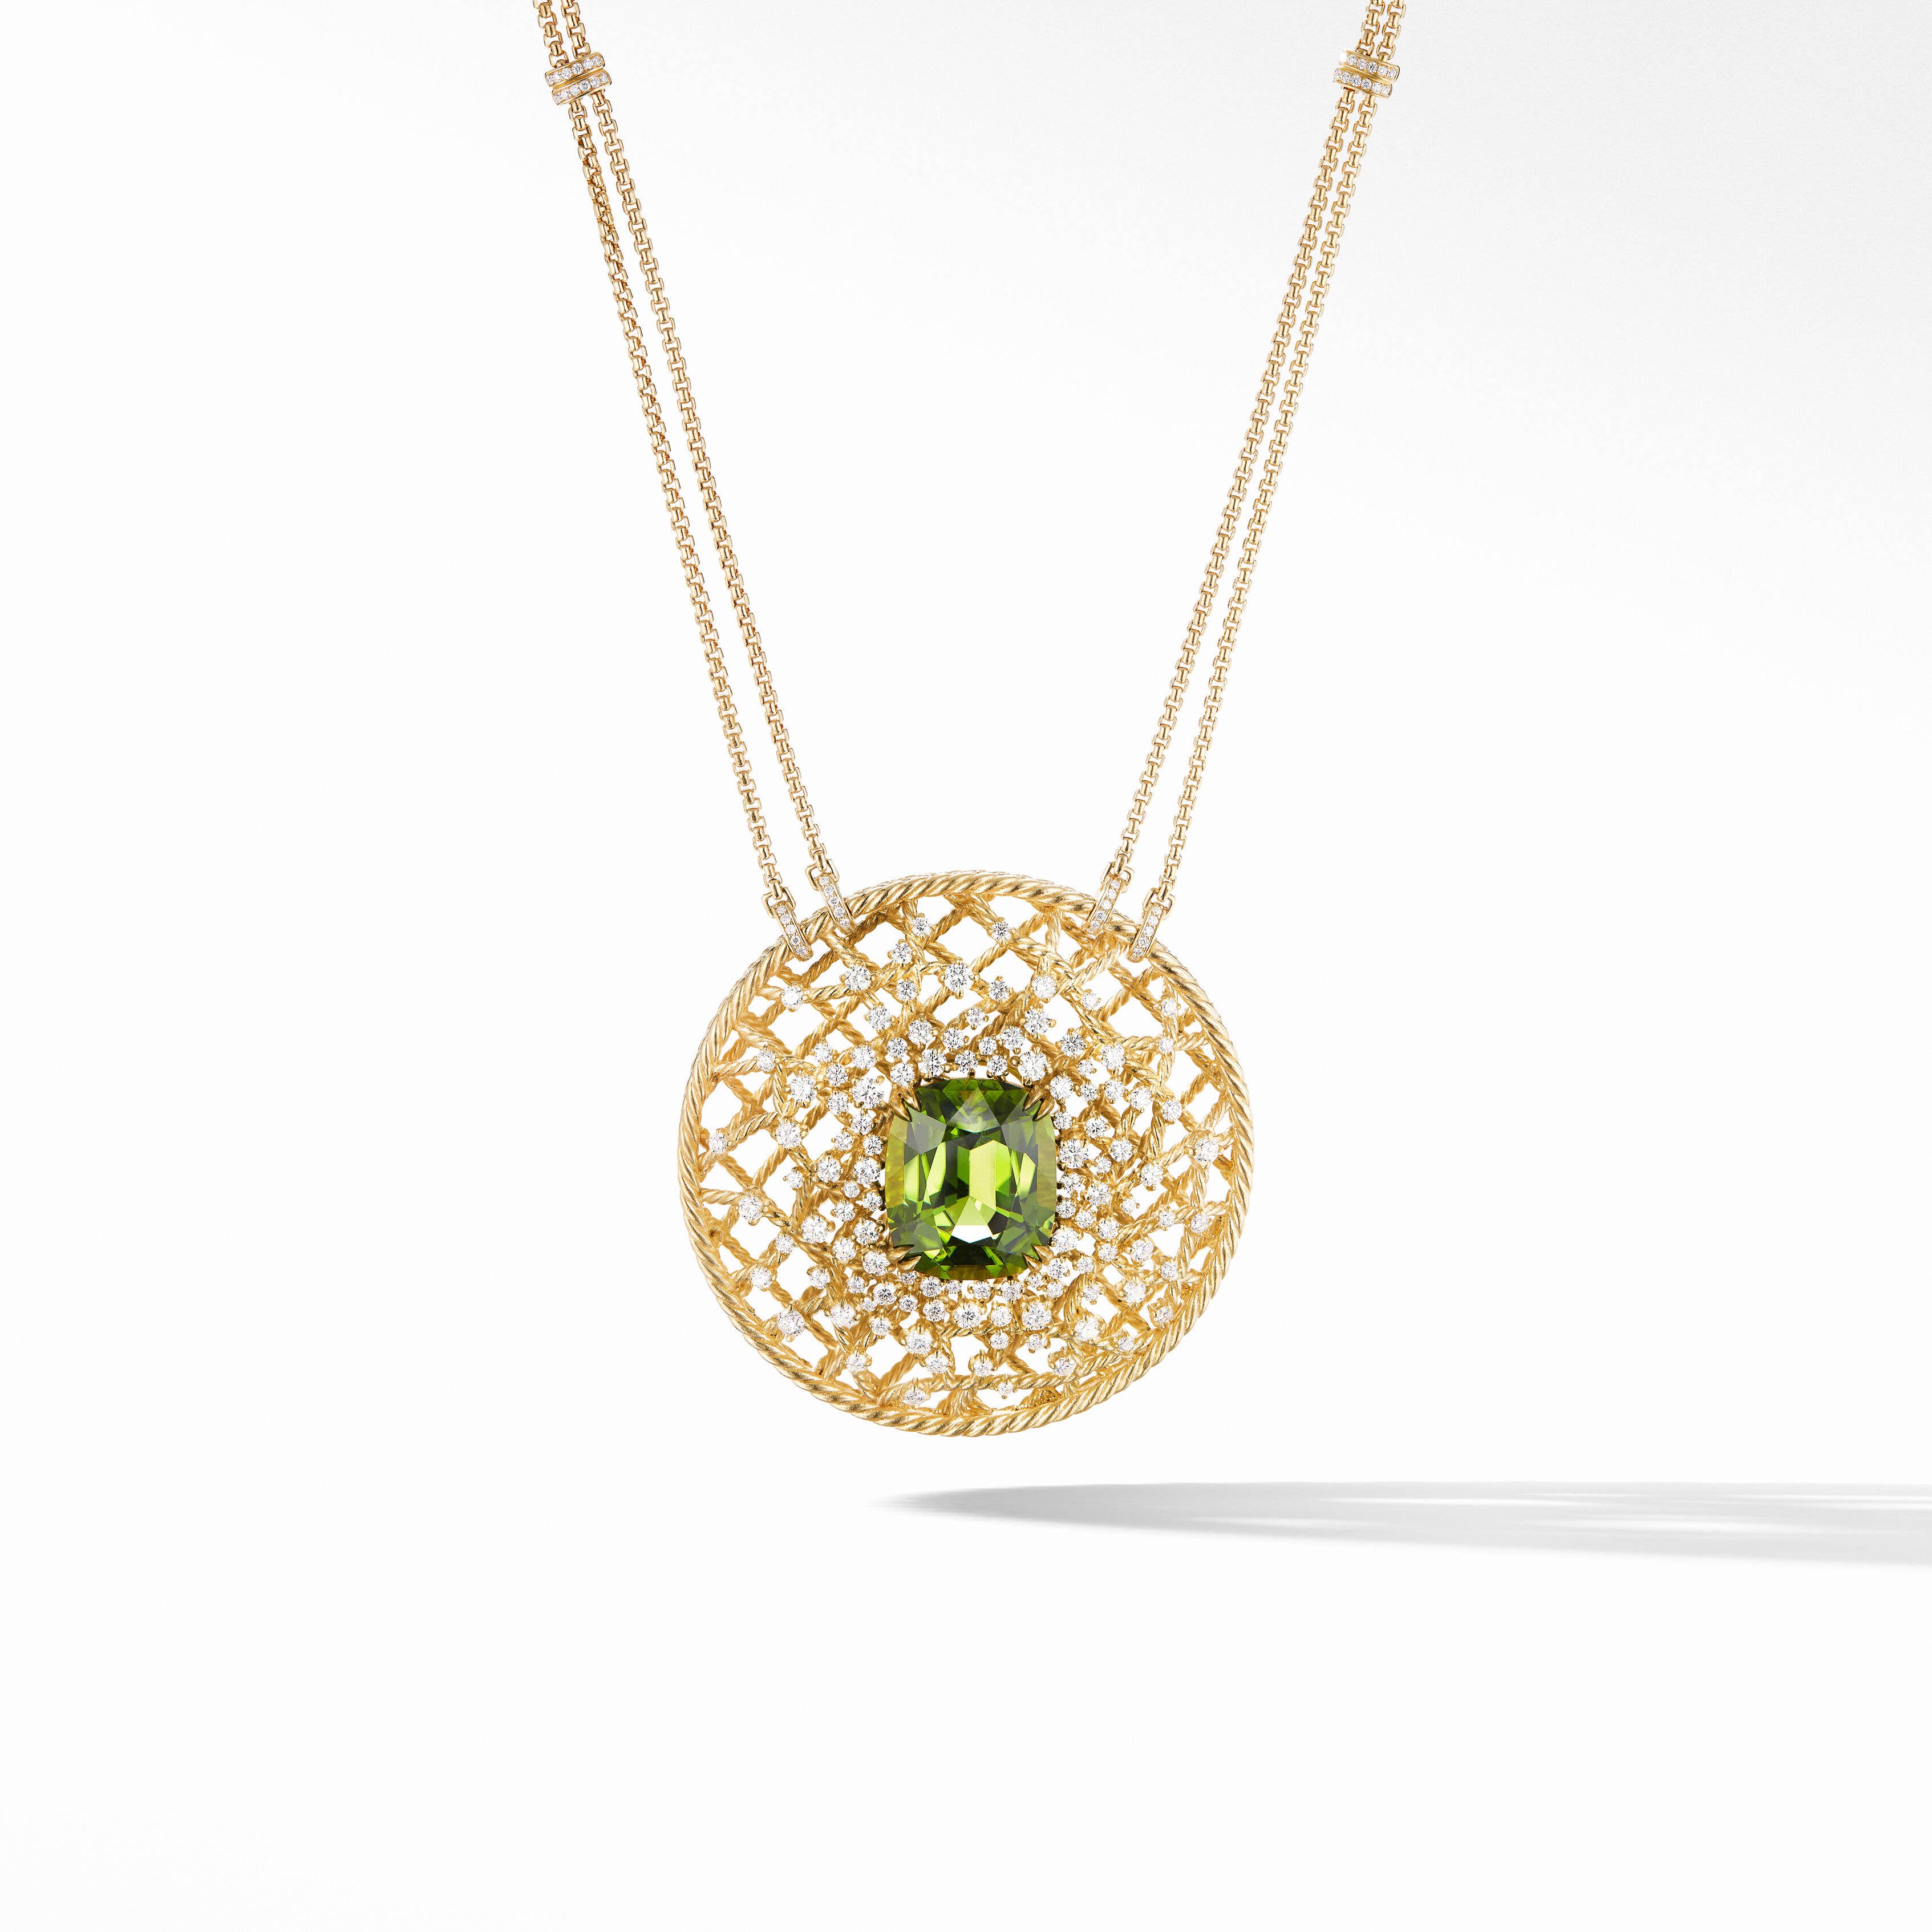 DY Lumina Pendant Necklace in 18K Yellow Gold with Peridot and Pavé Diamonds